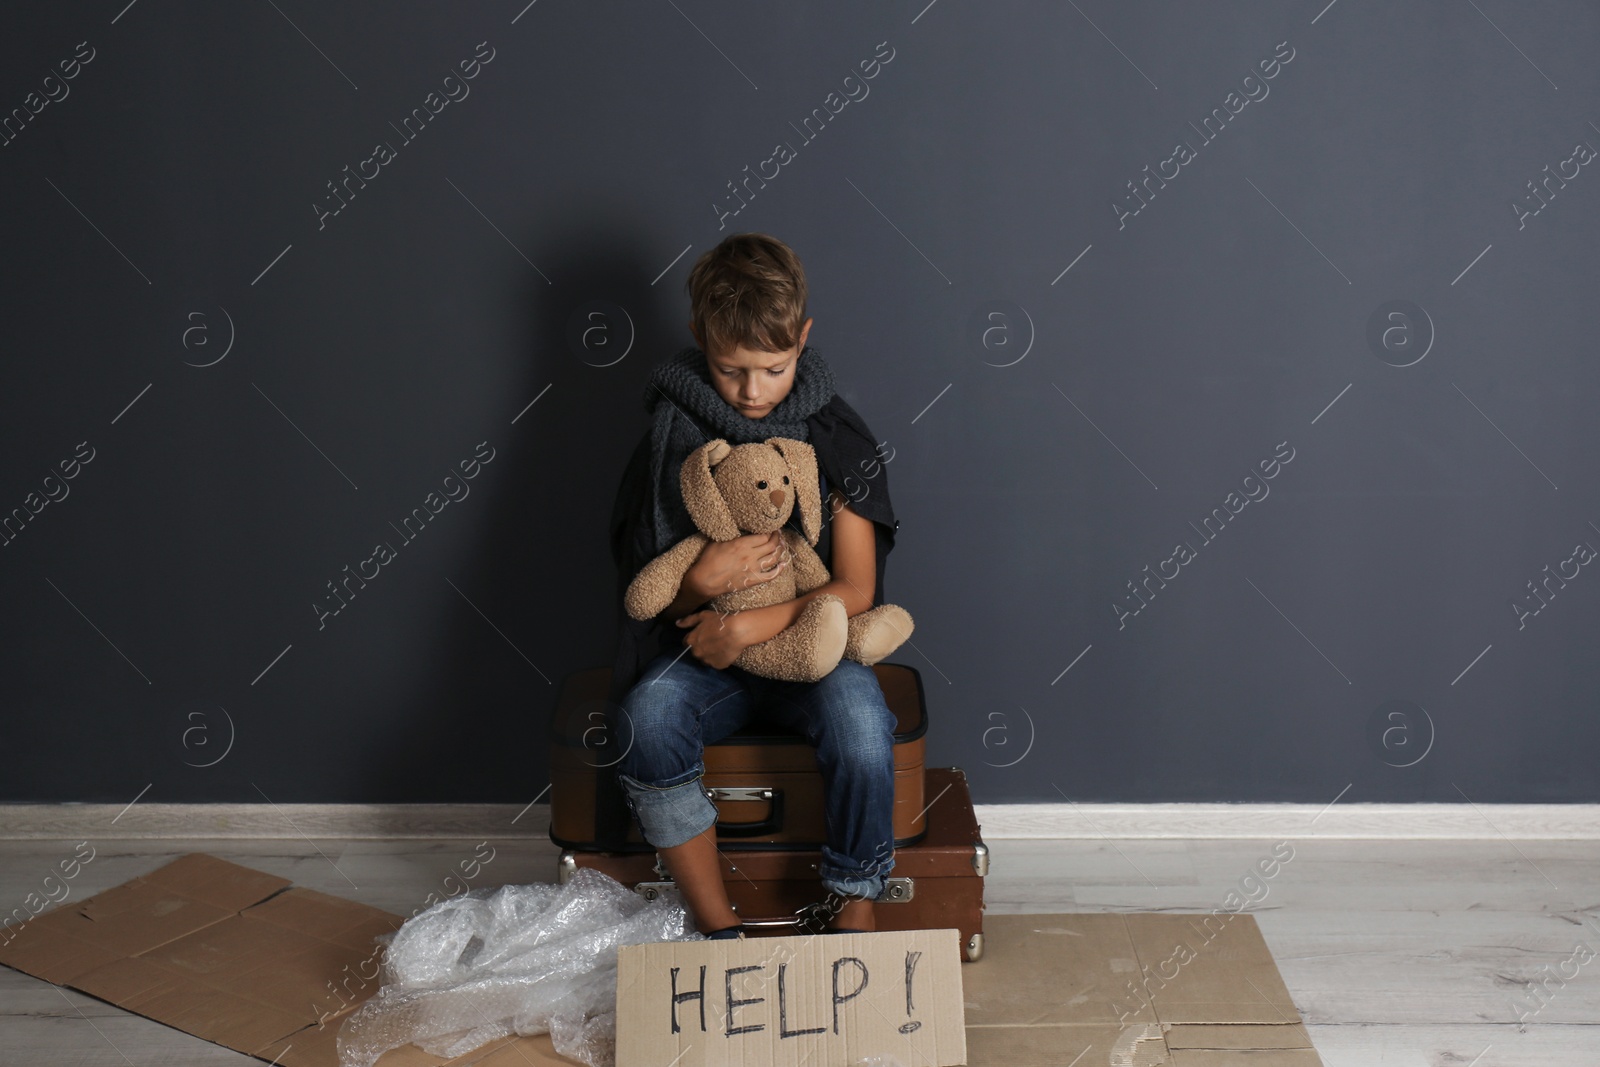 Photo of Poor boy with toy asking for help near dark wall